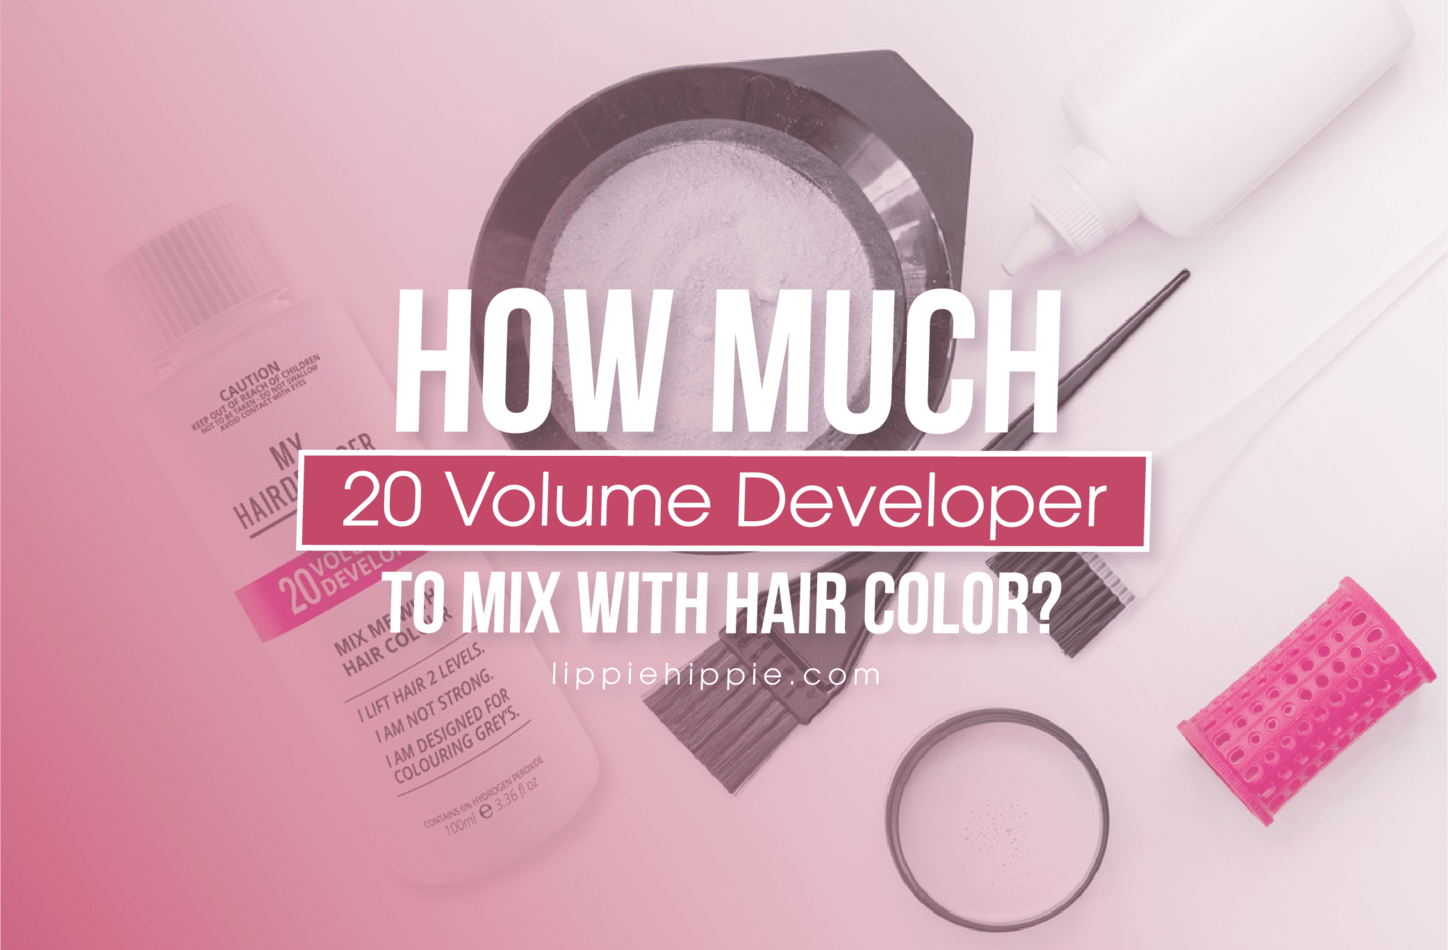 How Much 20 Volume Developer to Mix with Hair Color?